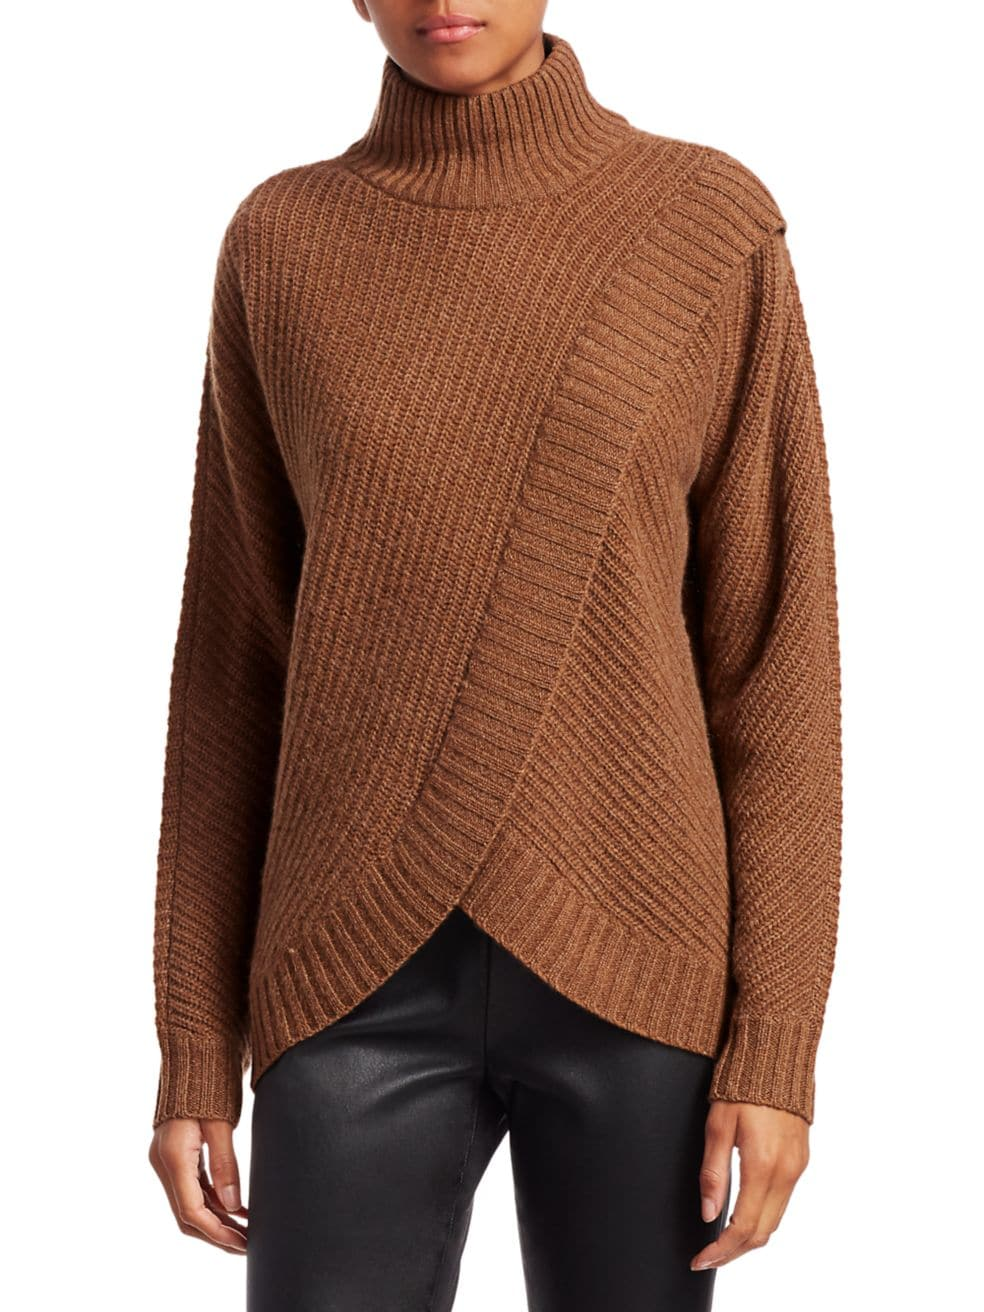 If You're On The Market For A Cashmere Sweater, This Is The Moment You've Been Waiting For